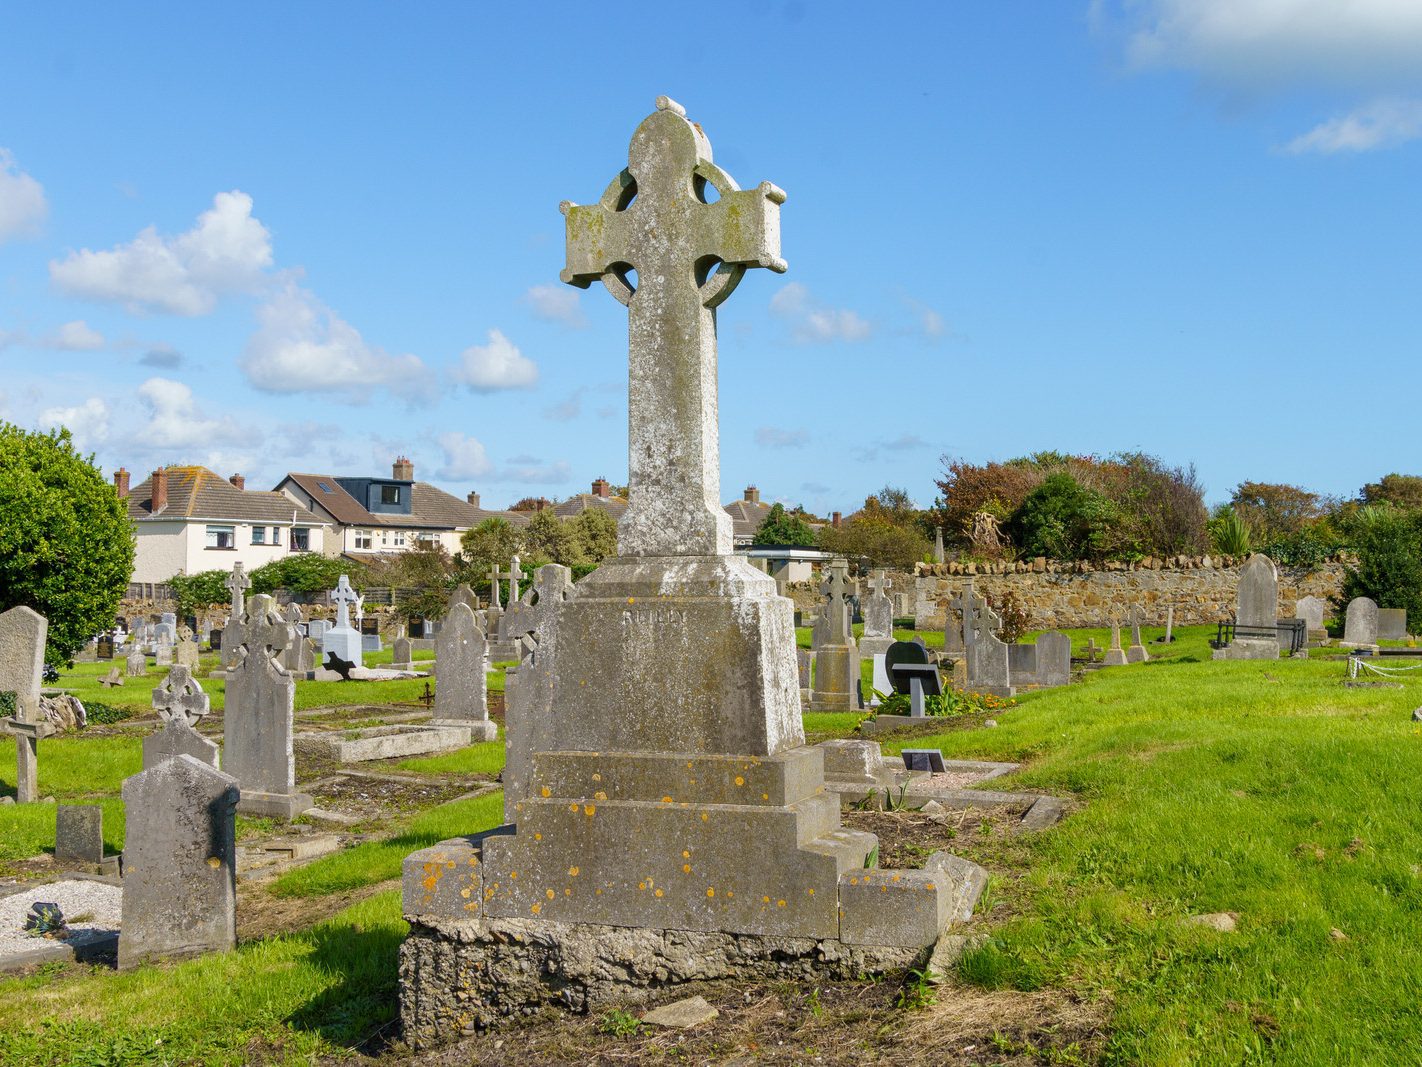 TODAY I MANAGED TO VISIT KILBARRACK CEMETERY [AFTER A NUMBER OF FAILED ATTEMPTS OVER A PERIOD OF TEN YEARS] 001